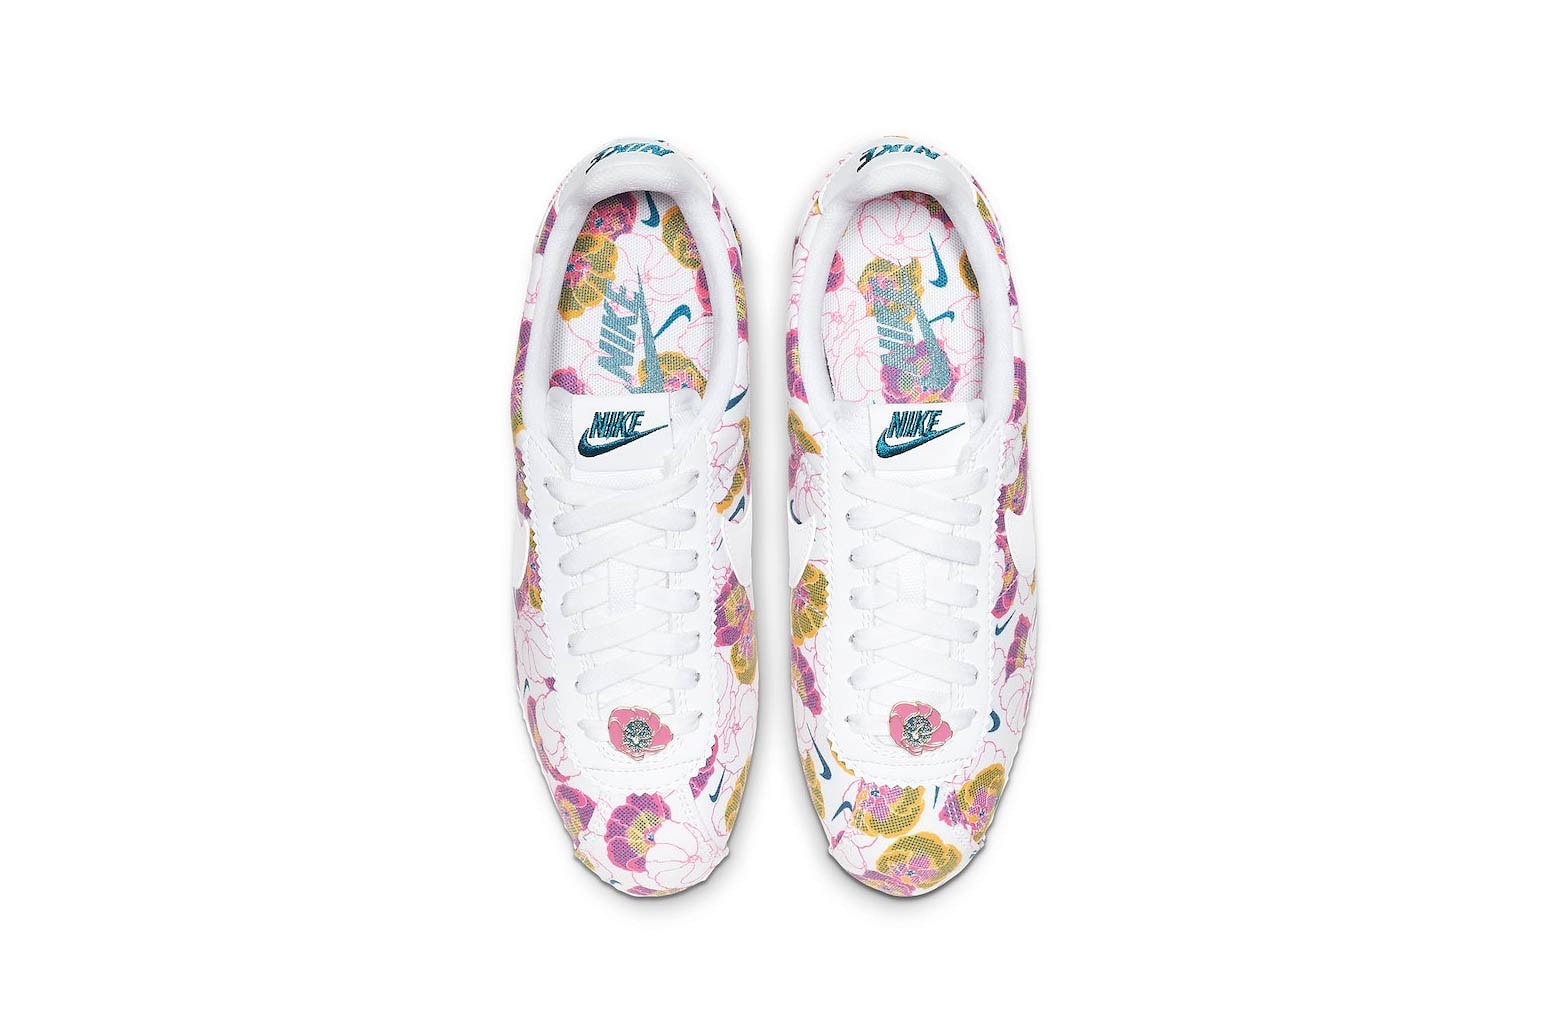 Nike Classic Cortez LX Floral Pack